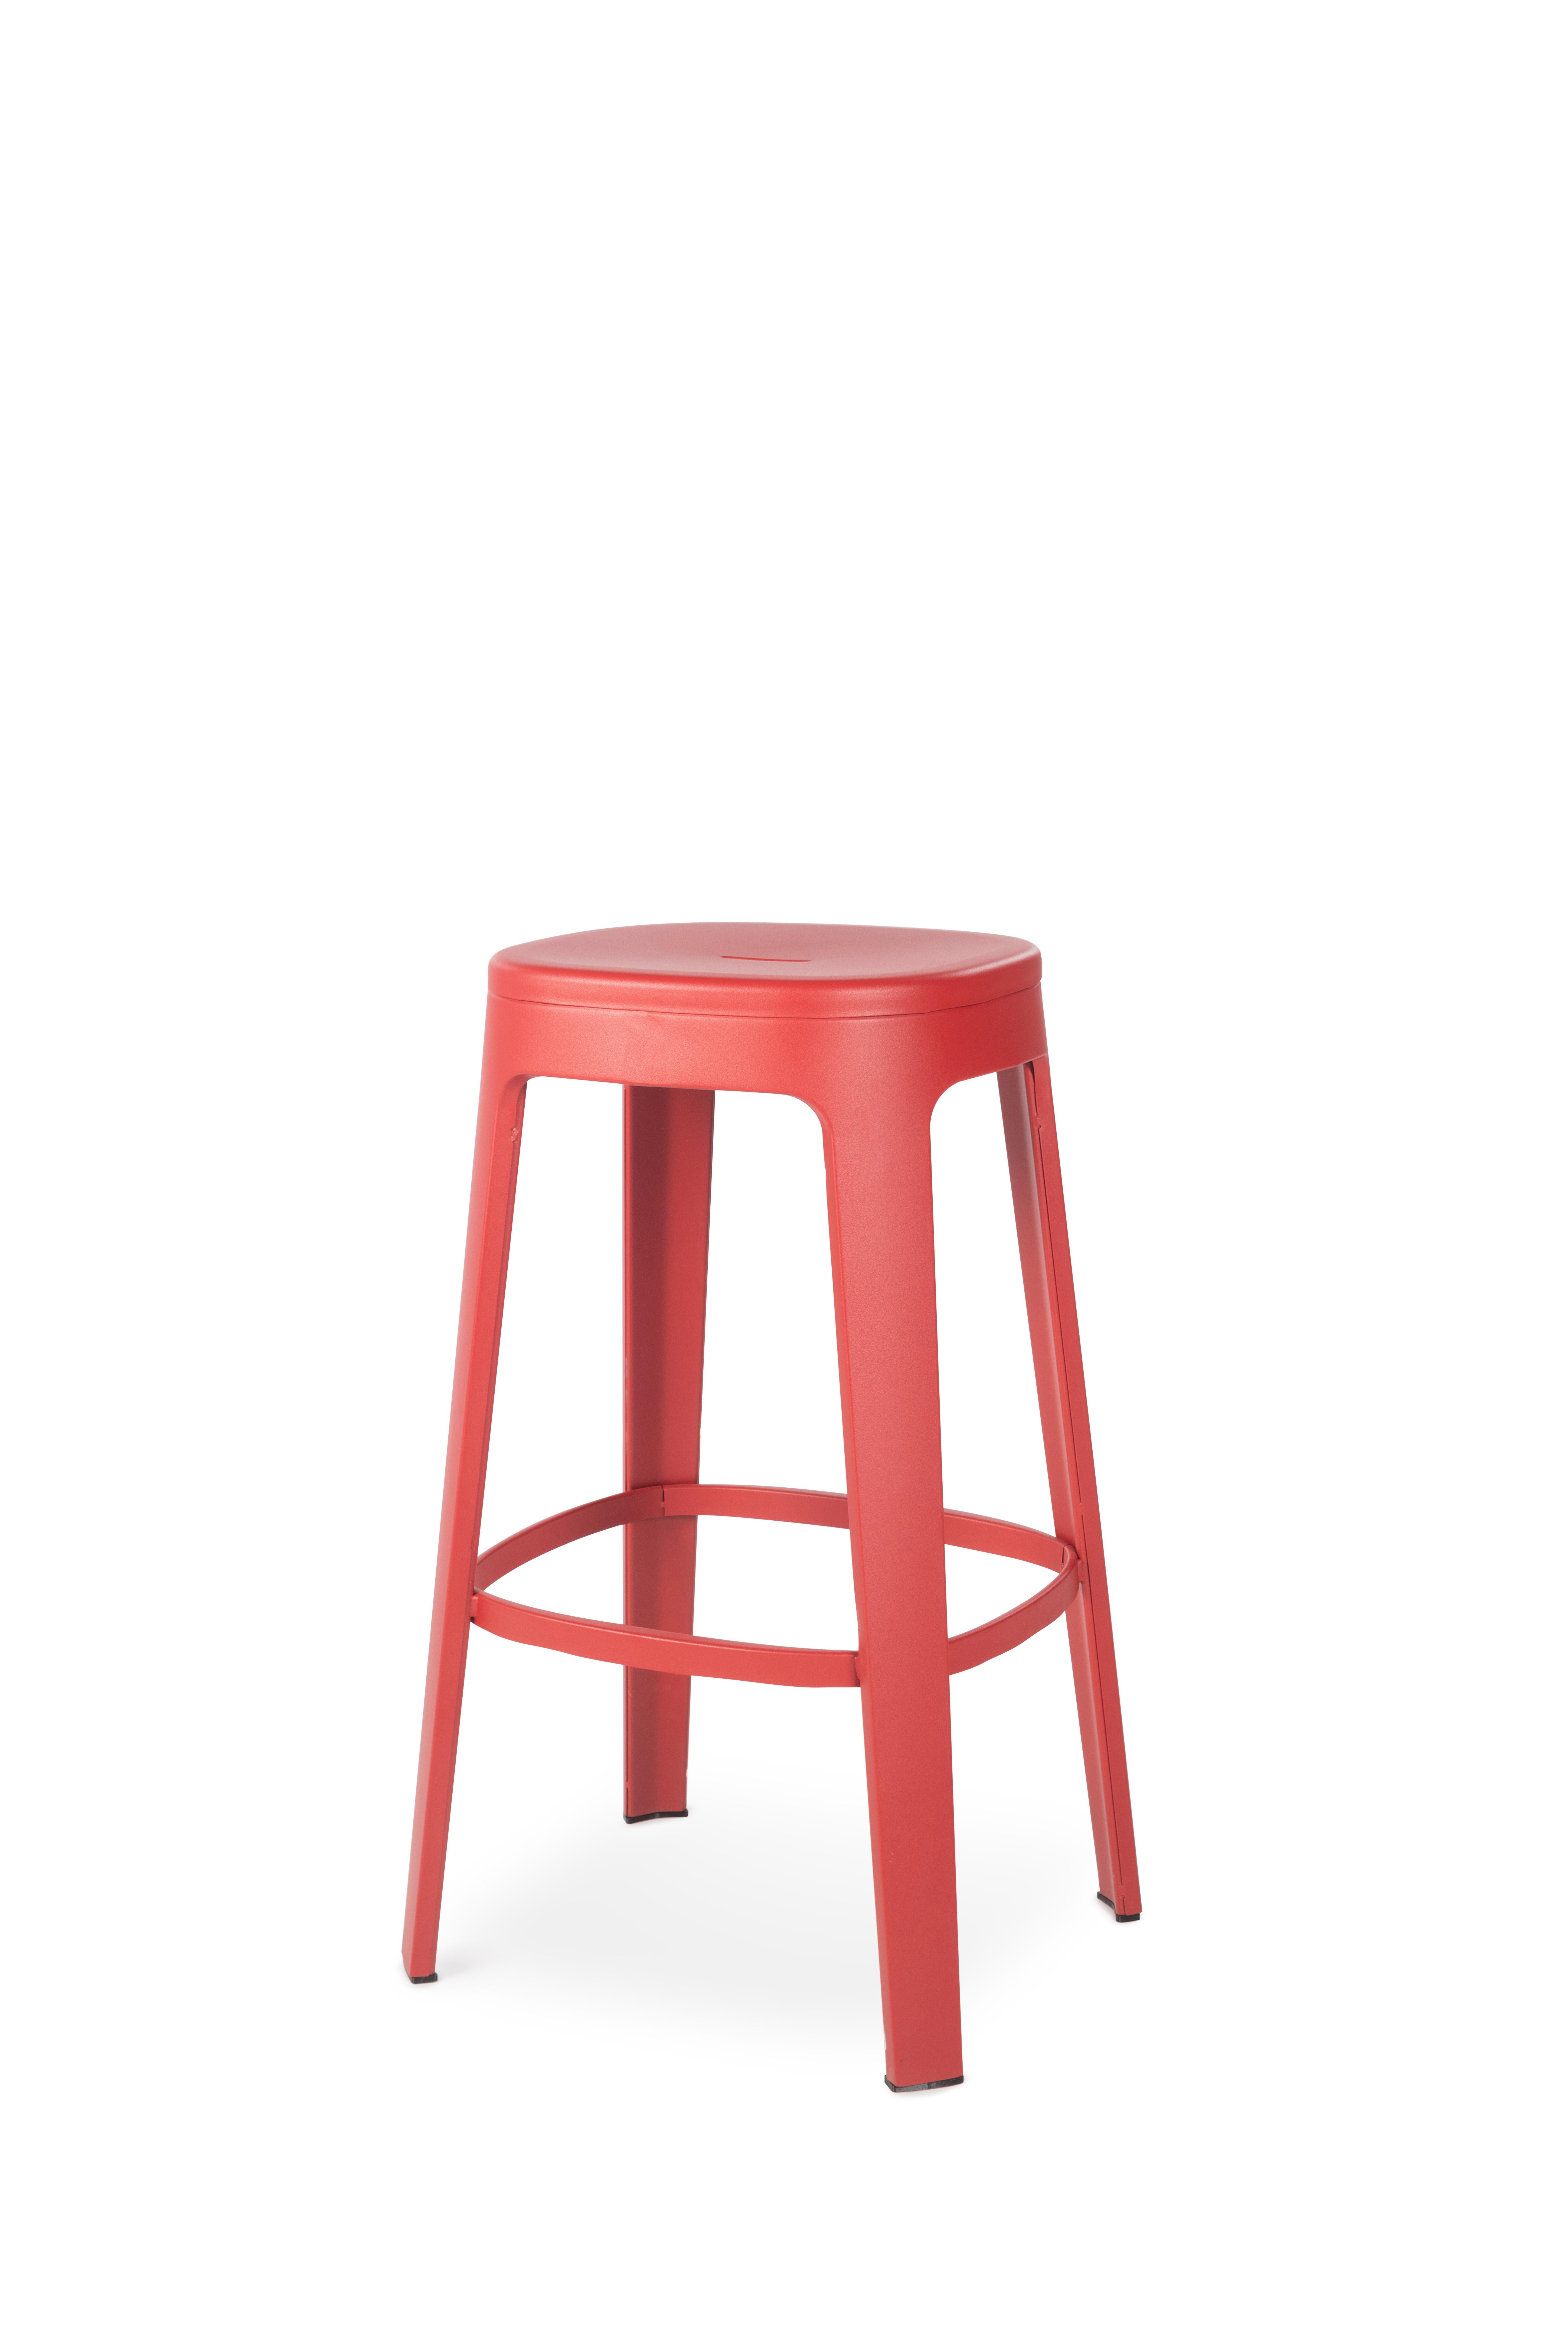 The Ombra stool has a clean design, with sleek, elegant lines; its comfortable, generously sized ergonomic seat; its range of eye-catching and easy-to-match colours; its different heights to suit all sorts of tables and bars. Ombra is designed and